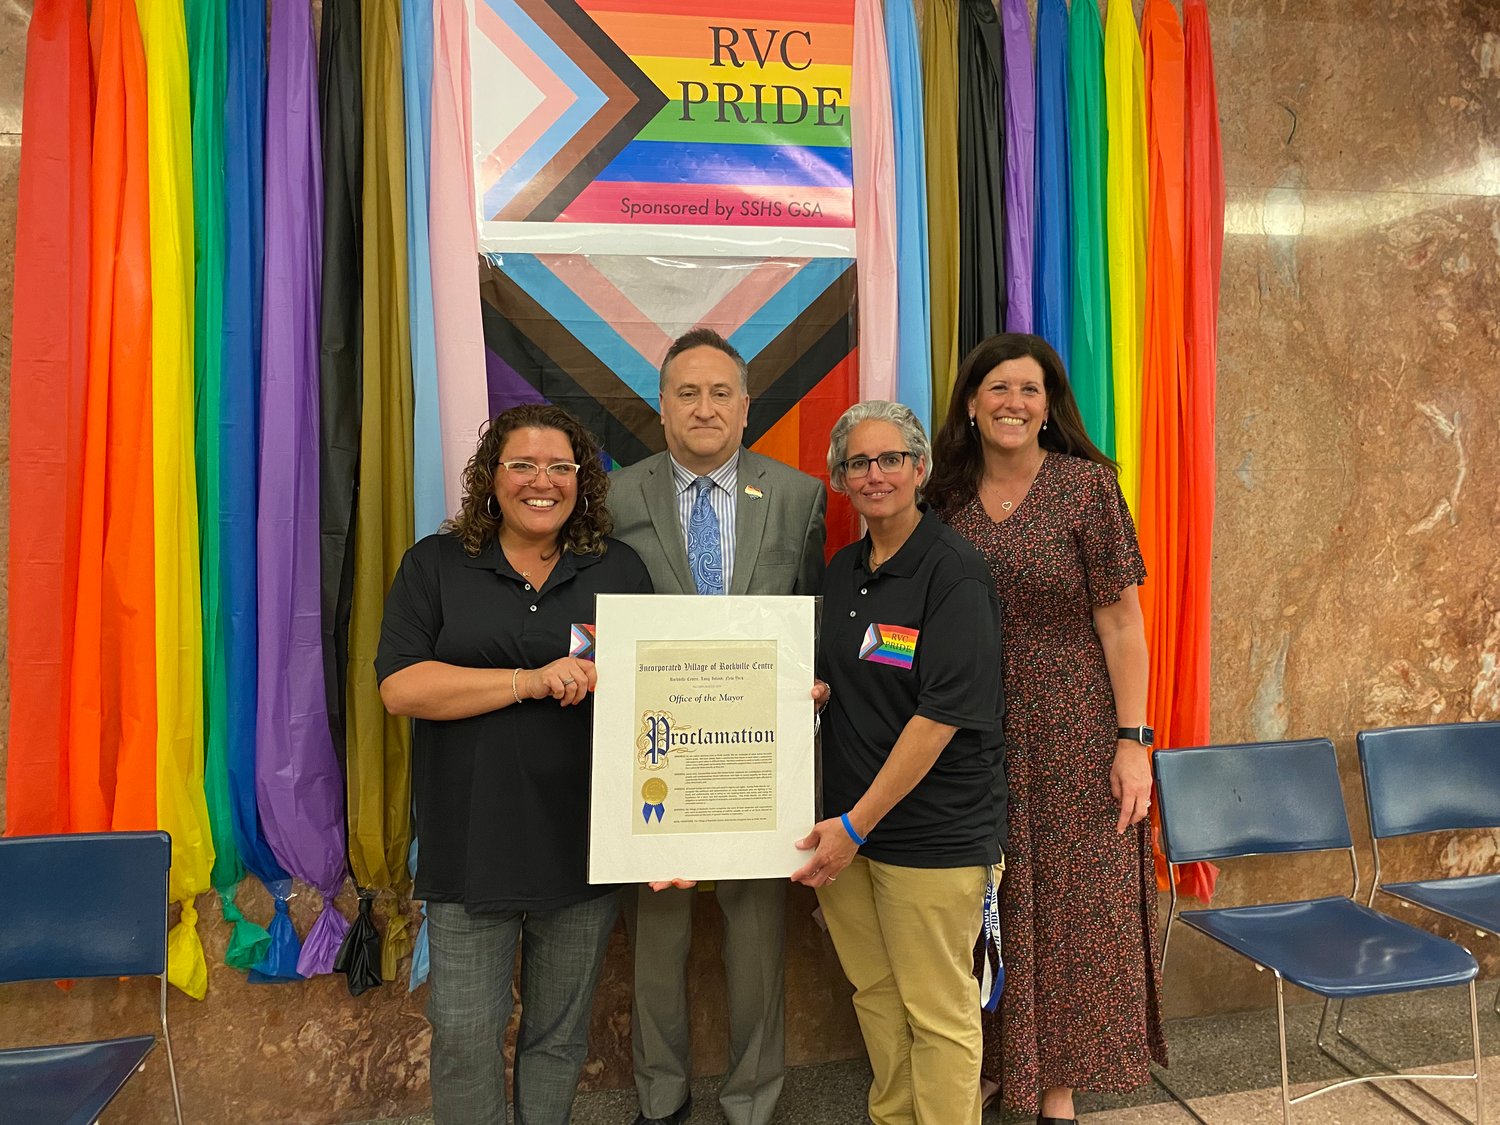 Christine Brown, left, and Nicole Knorr, second from right, of the Gay/Straight Alliance, and the Rev. Scott Ressman ushered in Pride Month with Deputy Mayor Kathleen Baxley, far right.